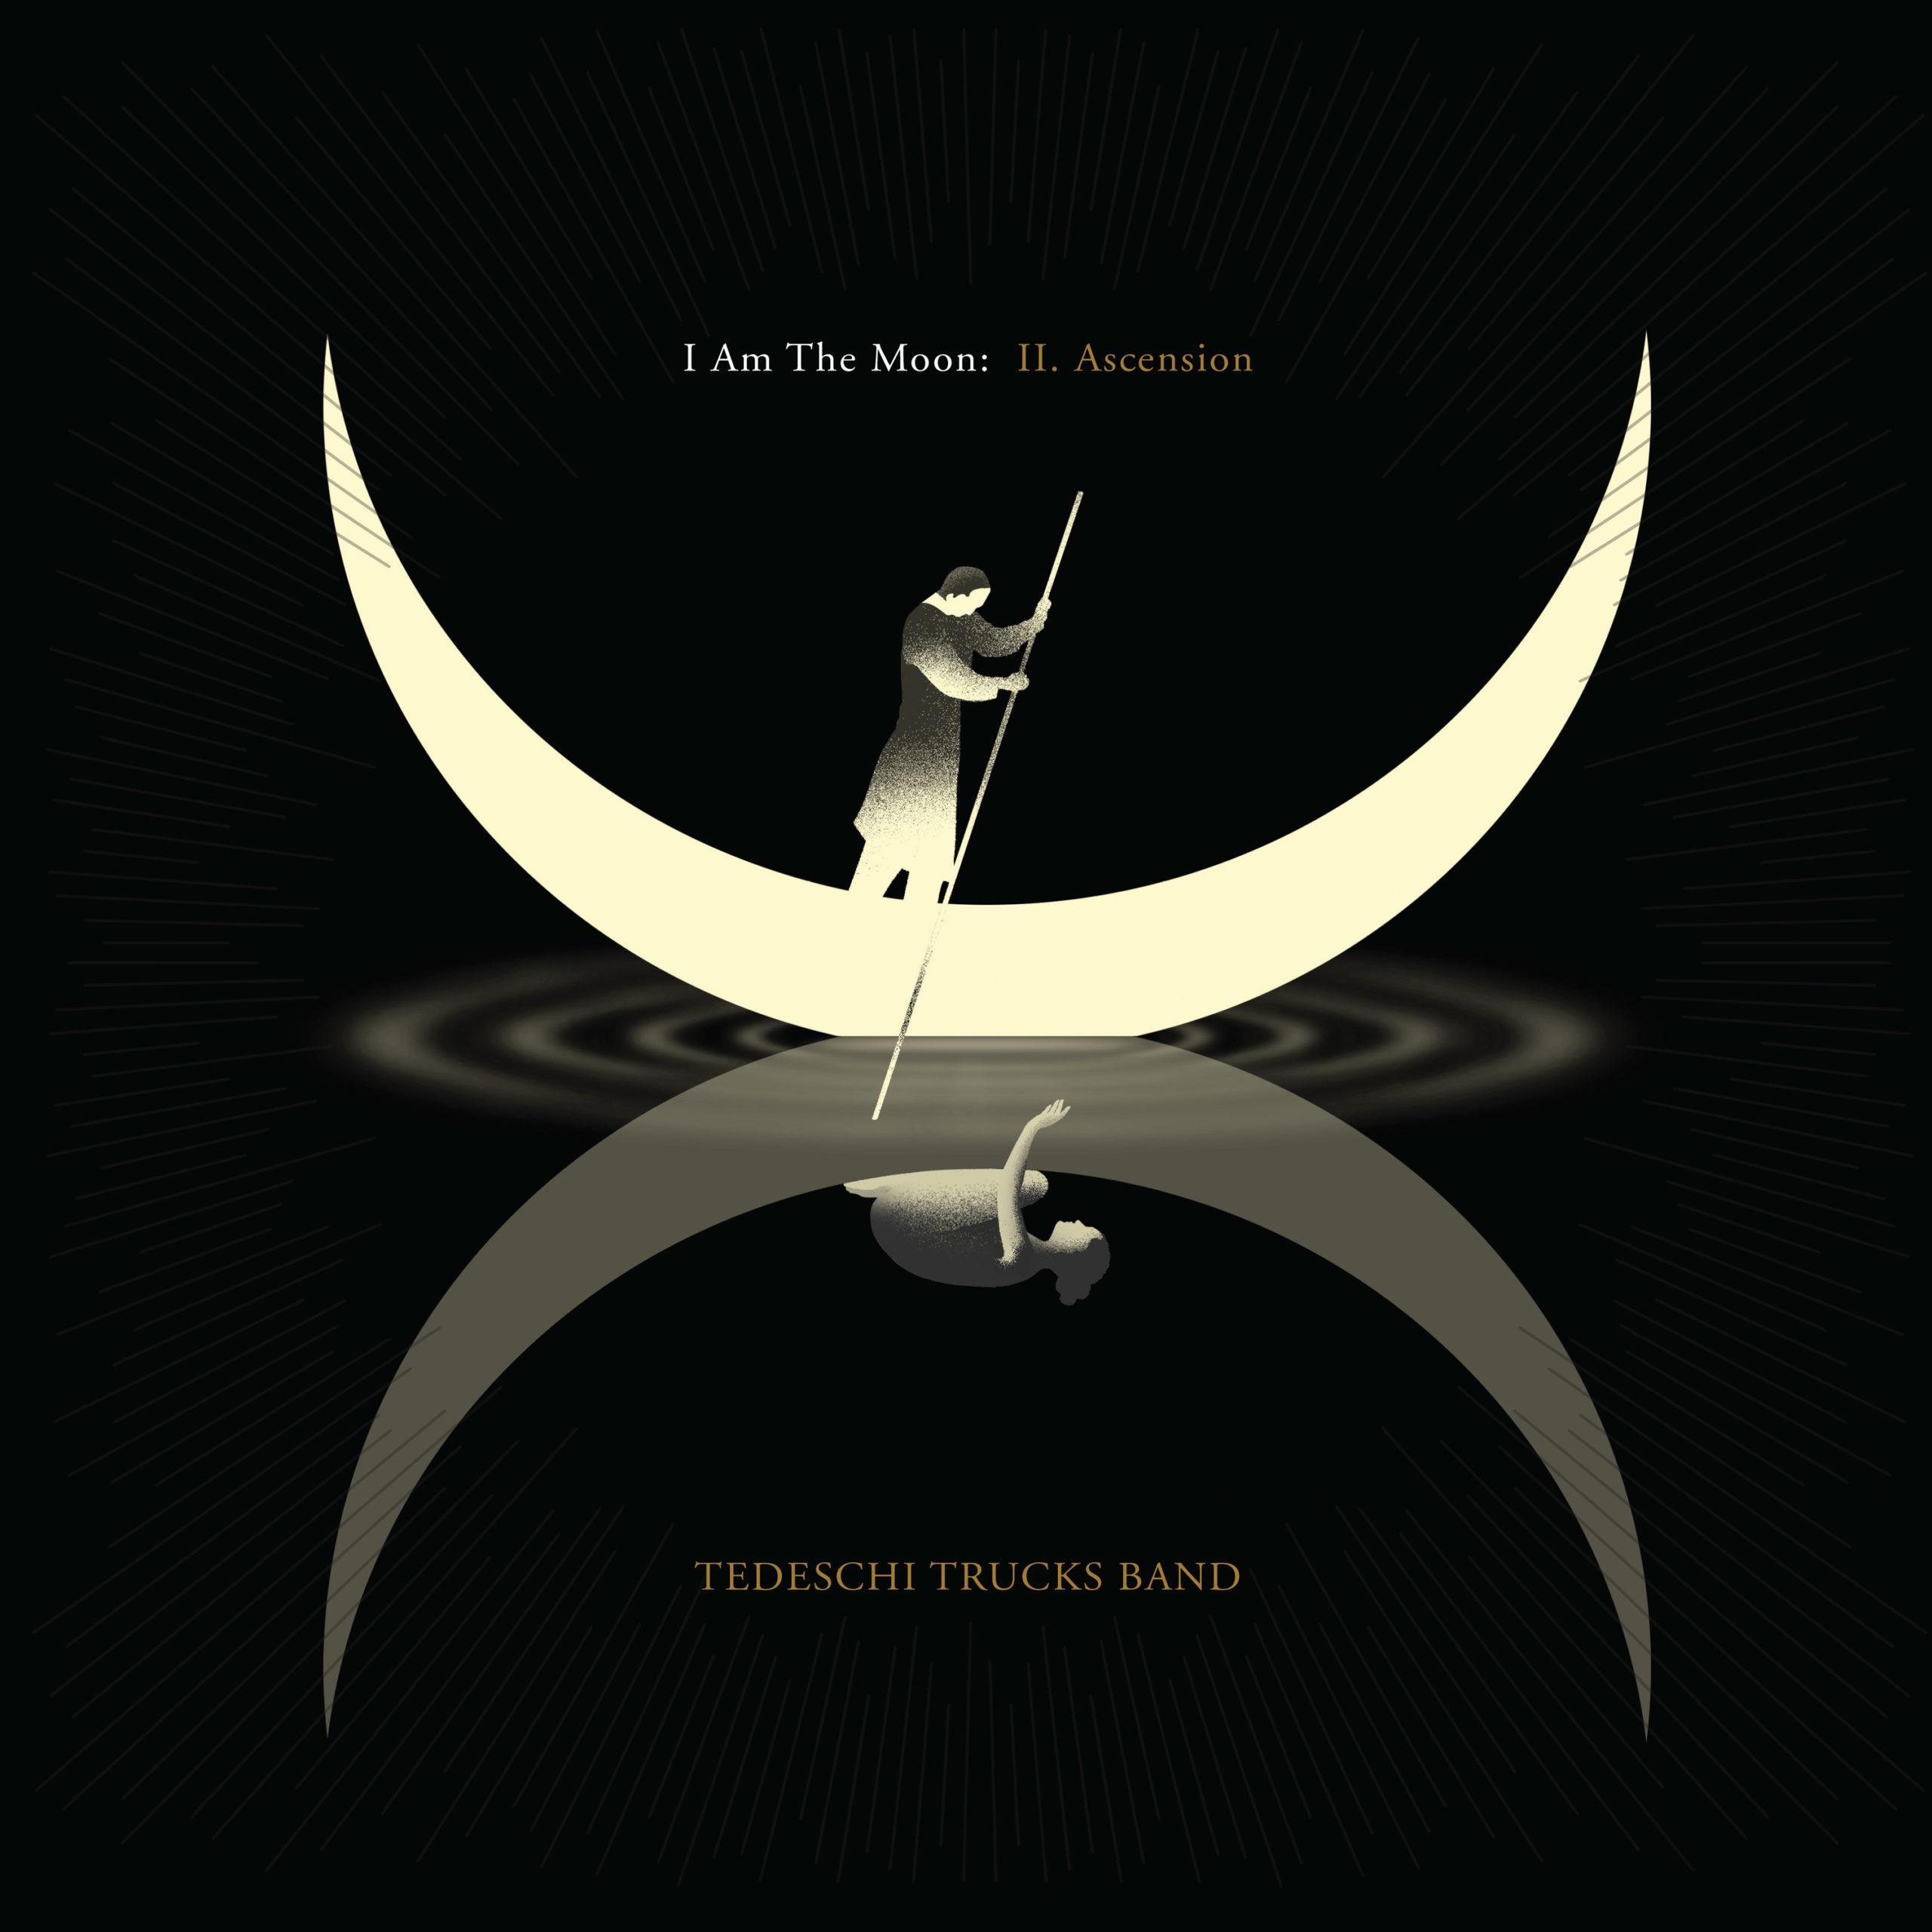 Tedeschi Trucks Band Releases I Am The Moon Episode Ii Ascension The Second Of Their Epic 4 